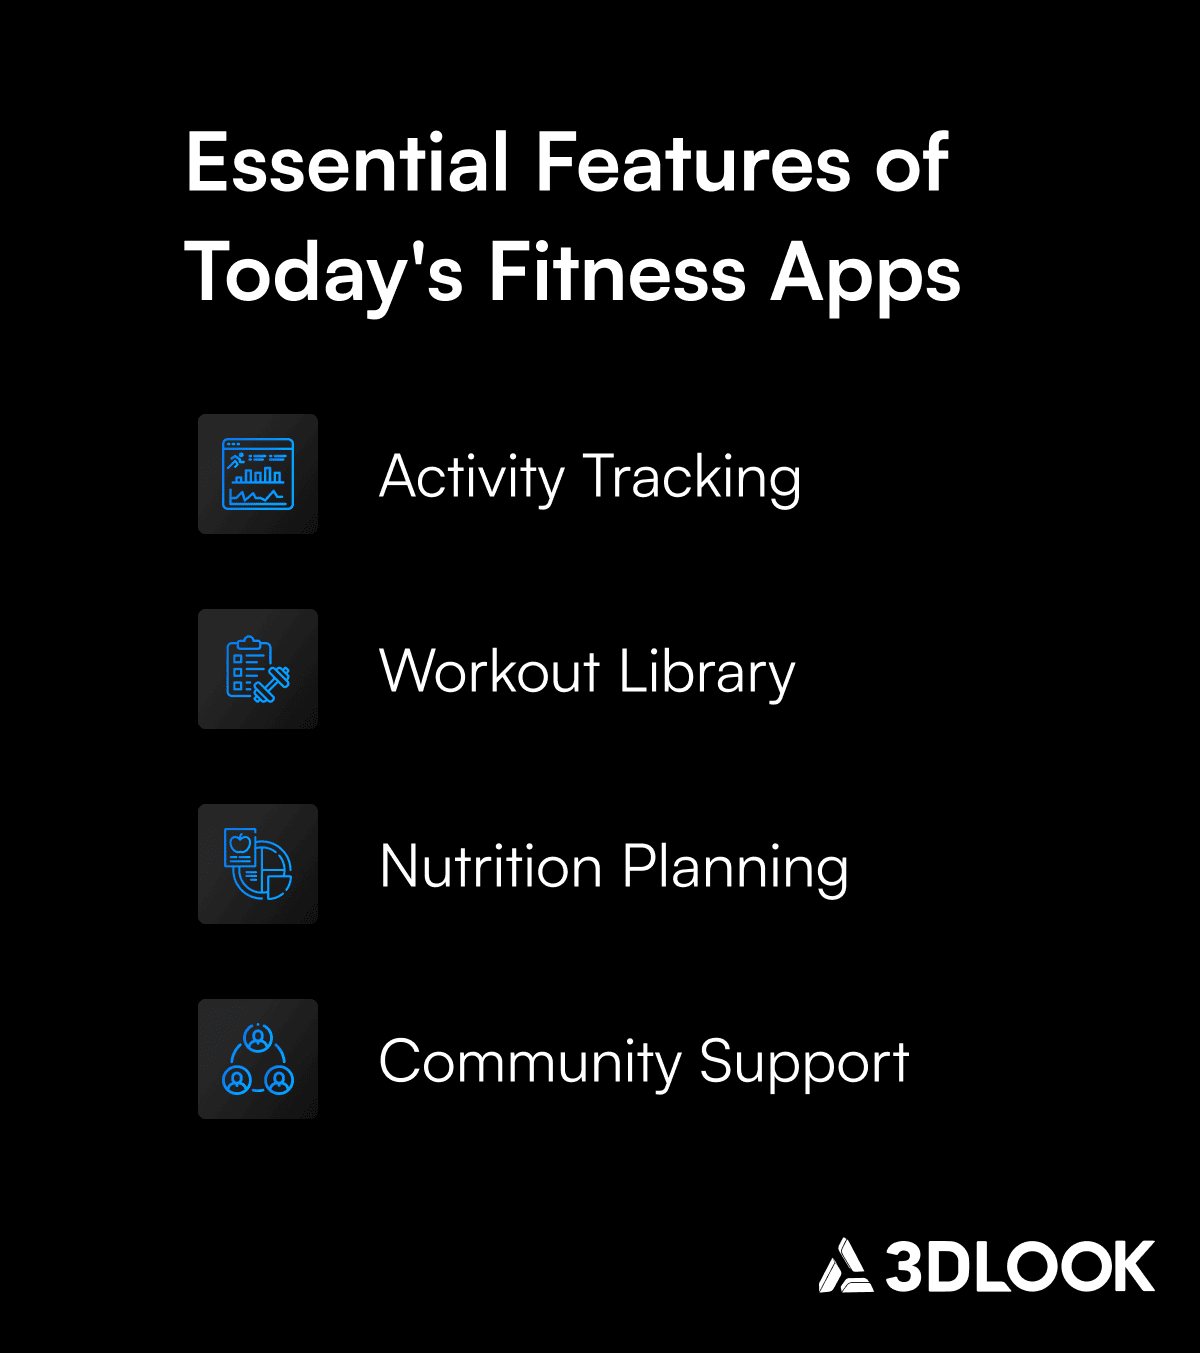 Top Trends in fitness apps today include a variety of essential features designed to help users reach their wellness goals.